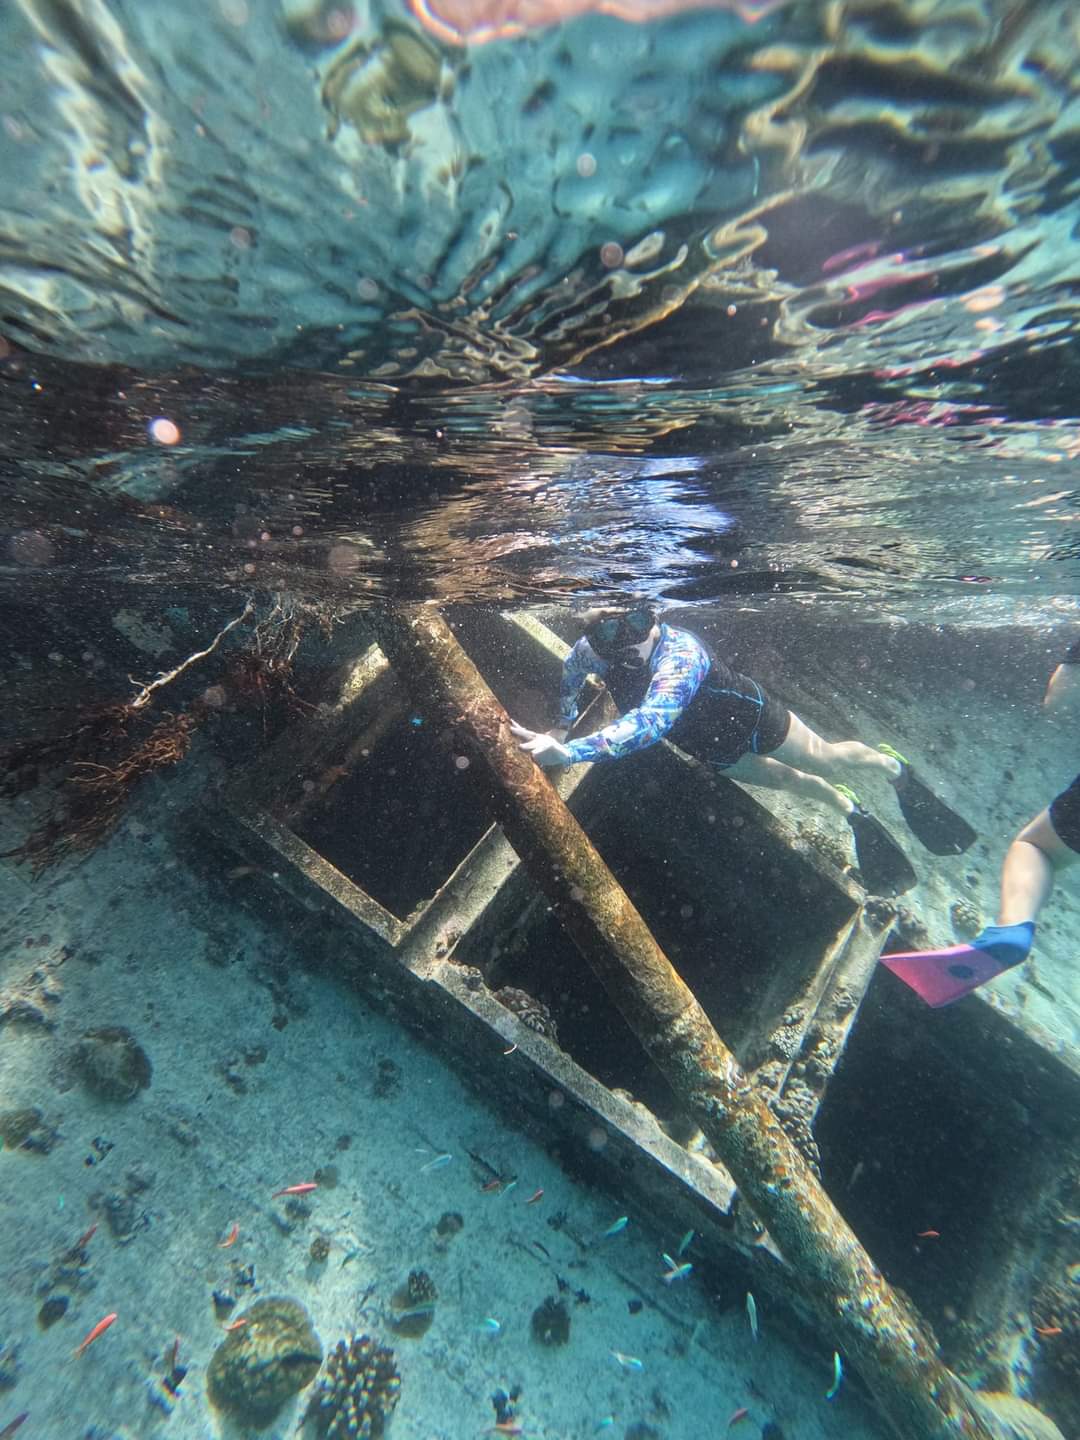 Me snorkelling at a shipwreck in the Maldives